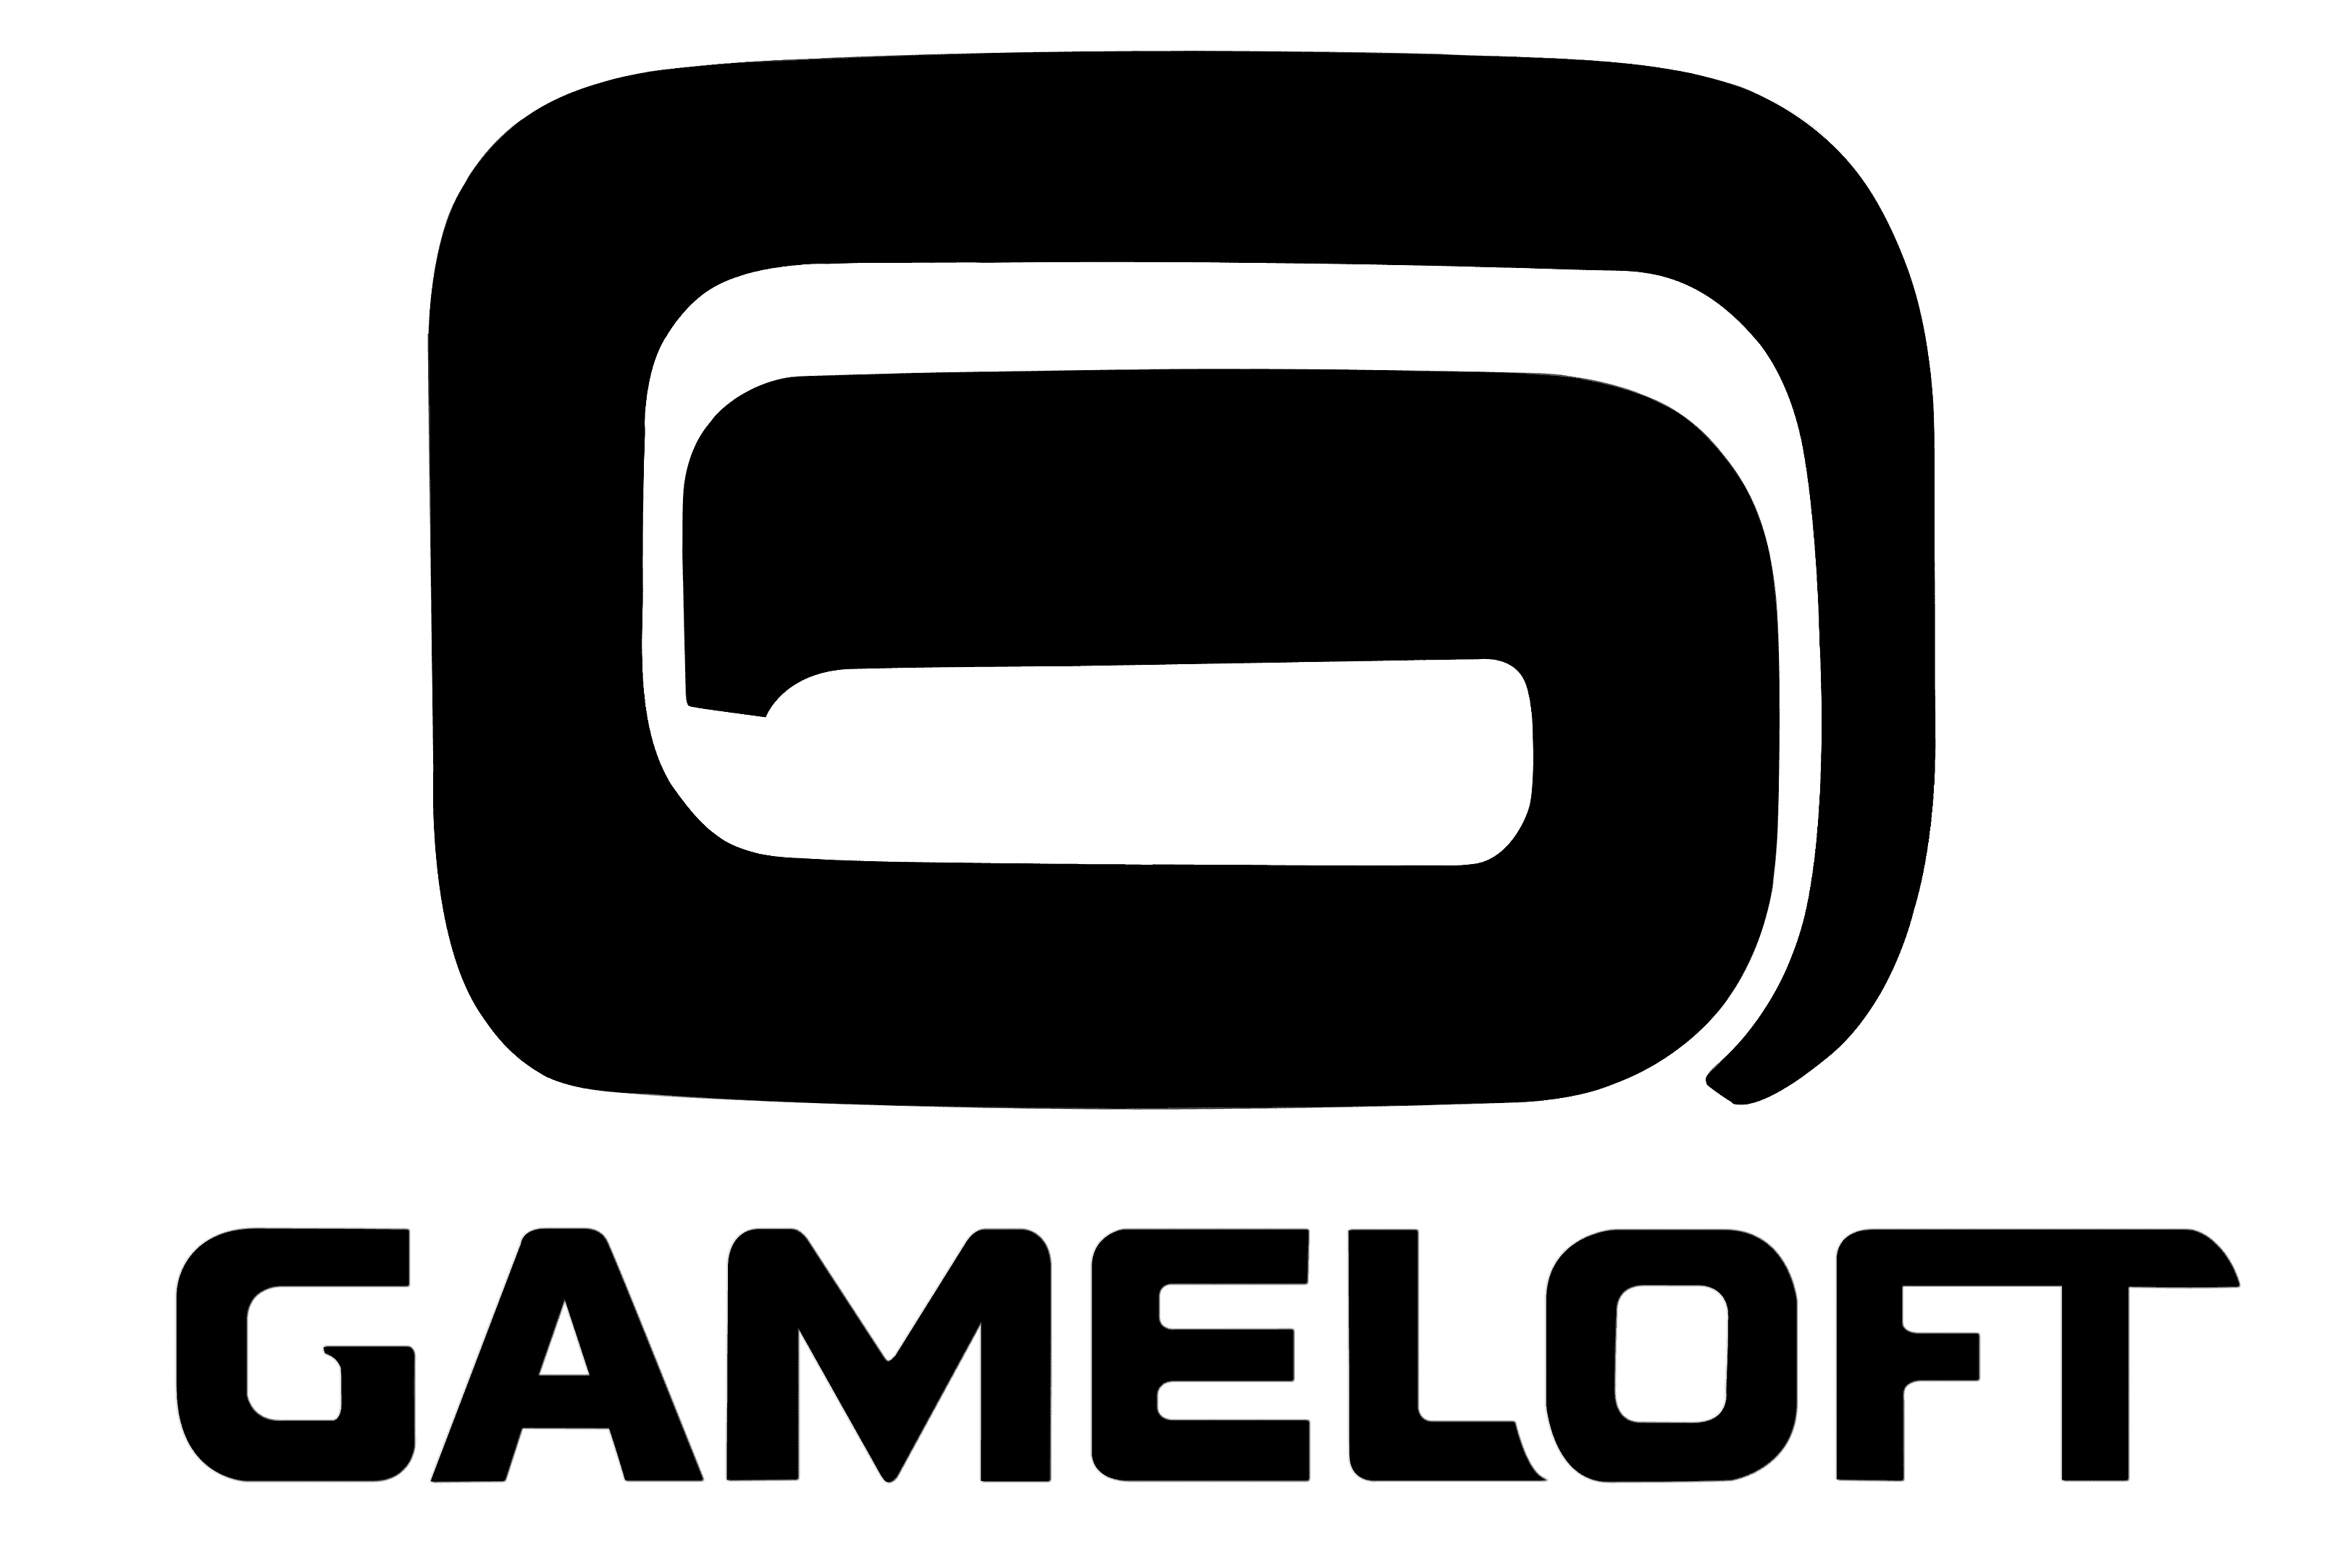 Latest Gameloft employment/hiring with high salary & attractive benefits